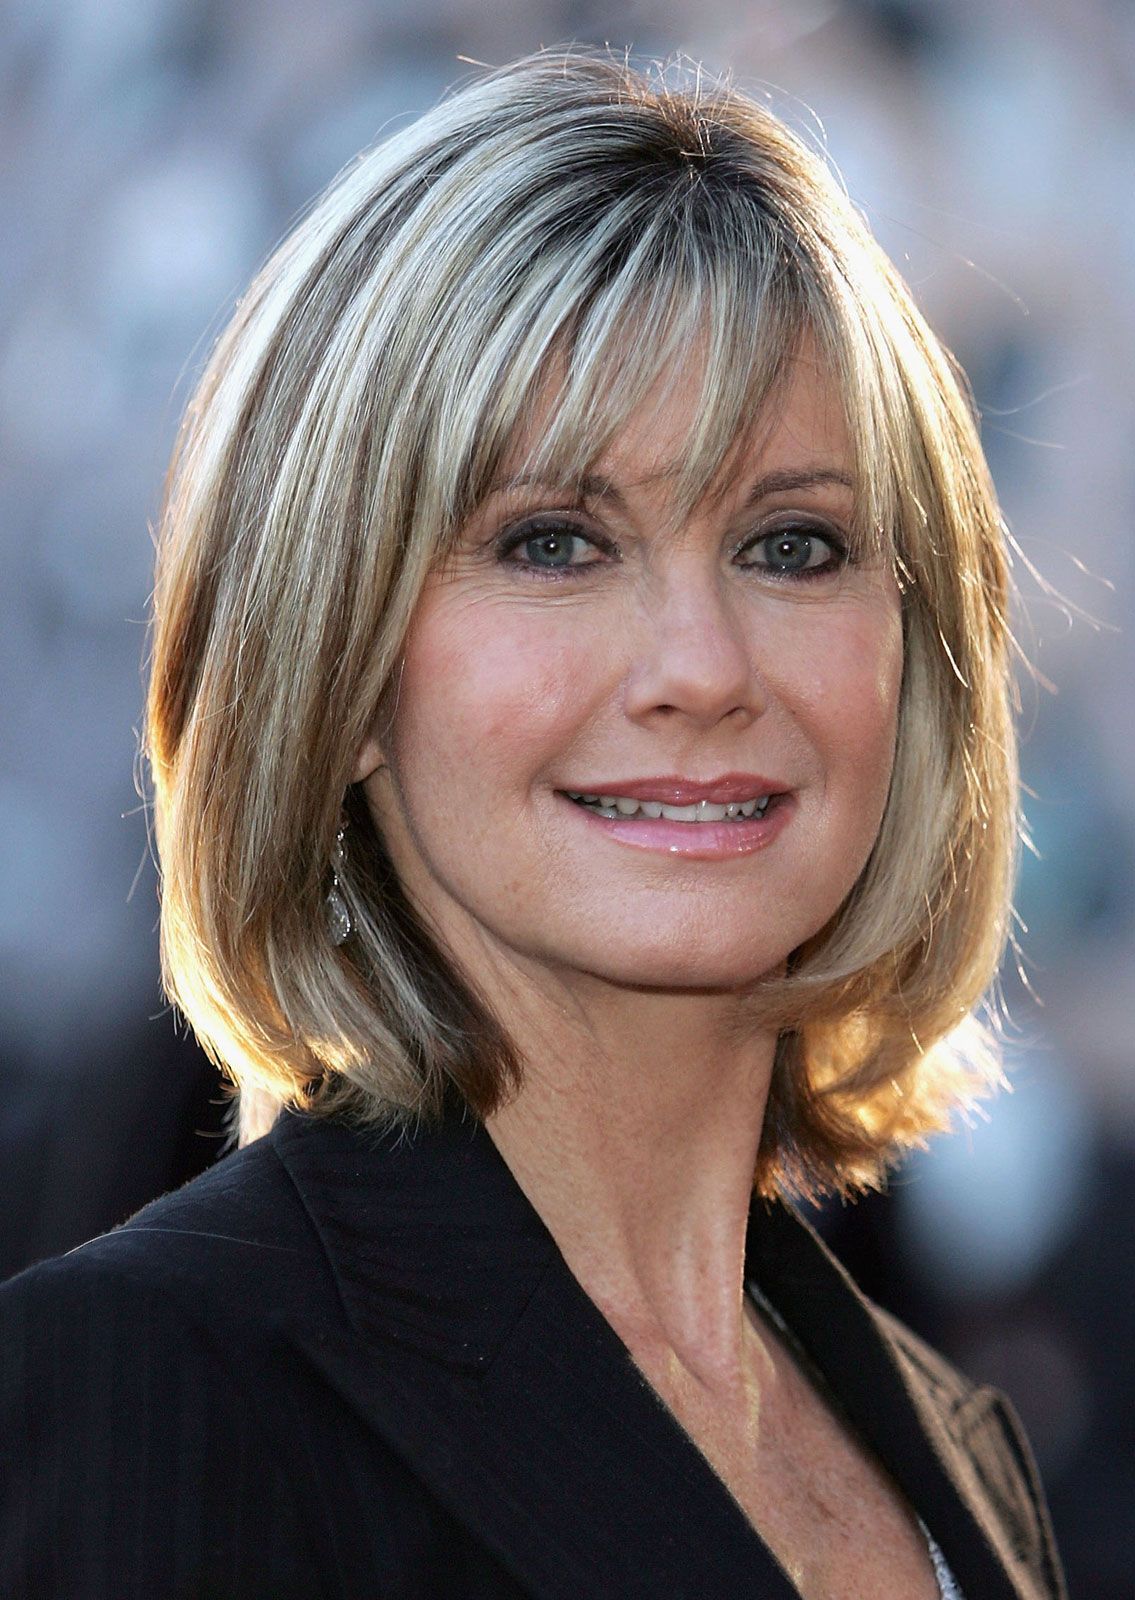 HAPPY BIRTHDAY TO THE LATE OLIVIA NEWTON-JOHN WHO WOULD\VE TURNED 74 TODAY. 